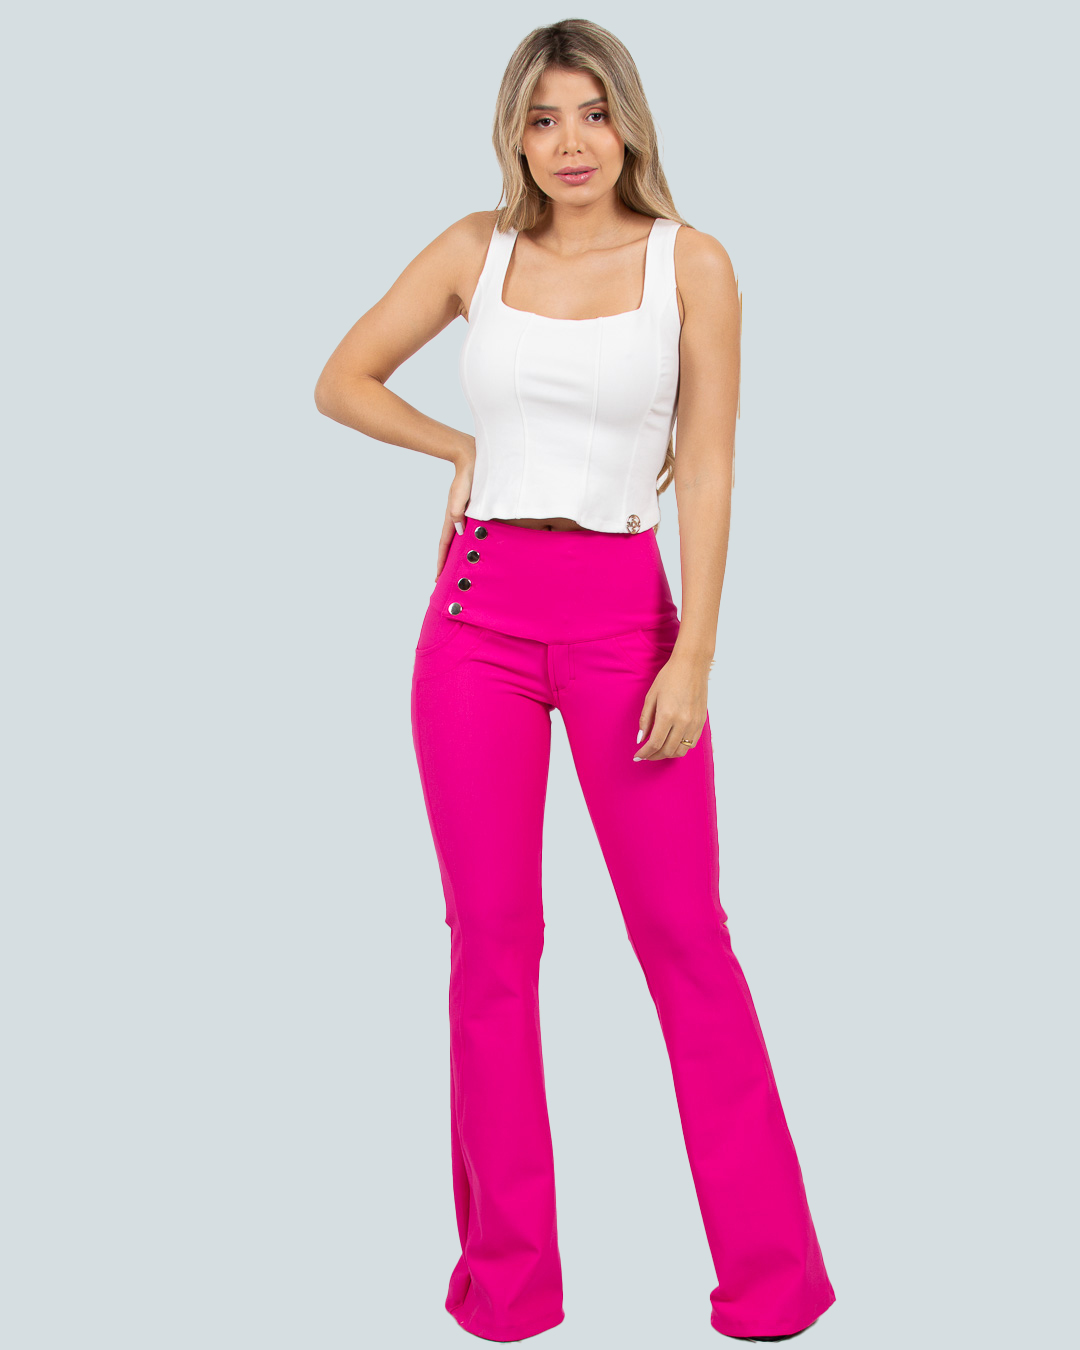 Miss Misses - Miss Misses Lipo Flare Pants With Wide Pink Waistband - 18527054